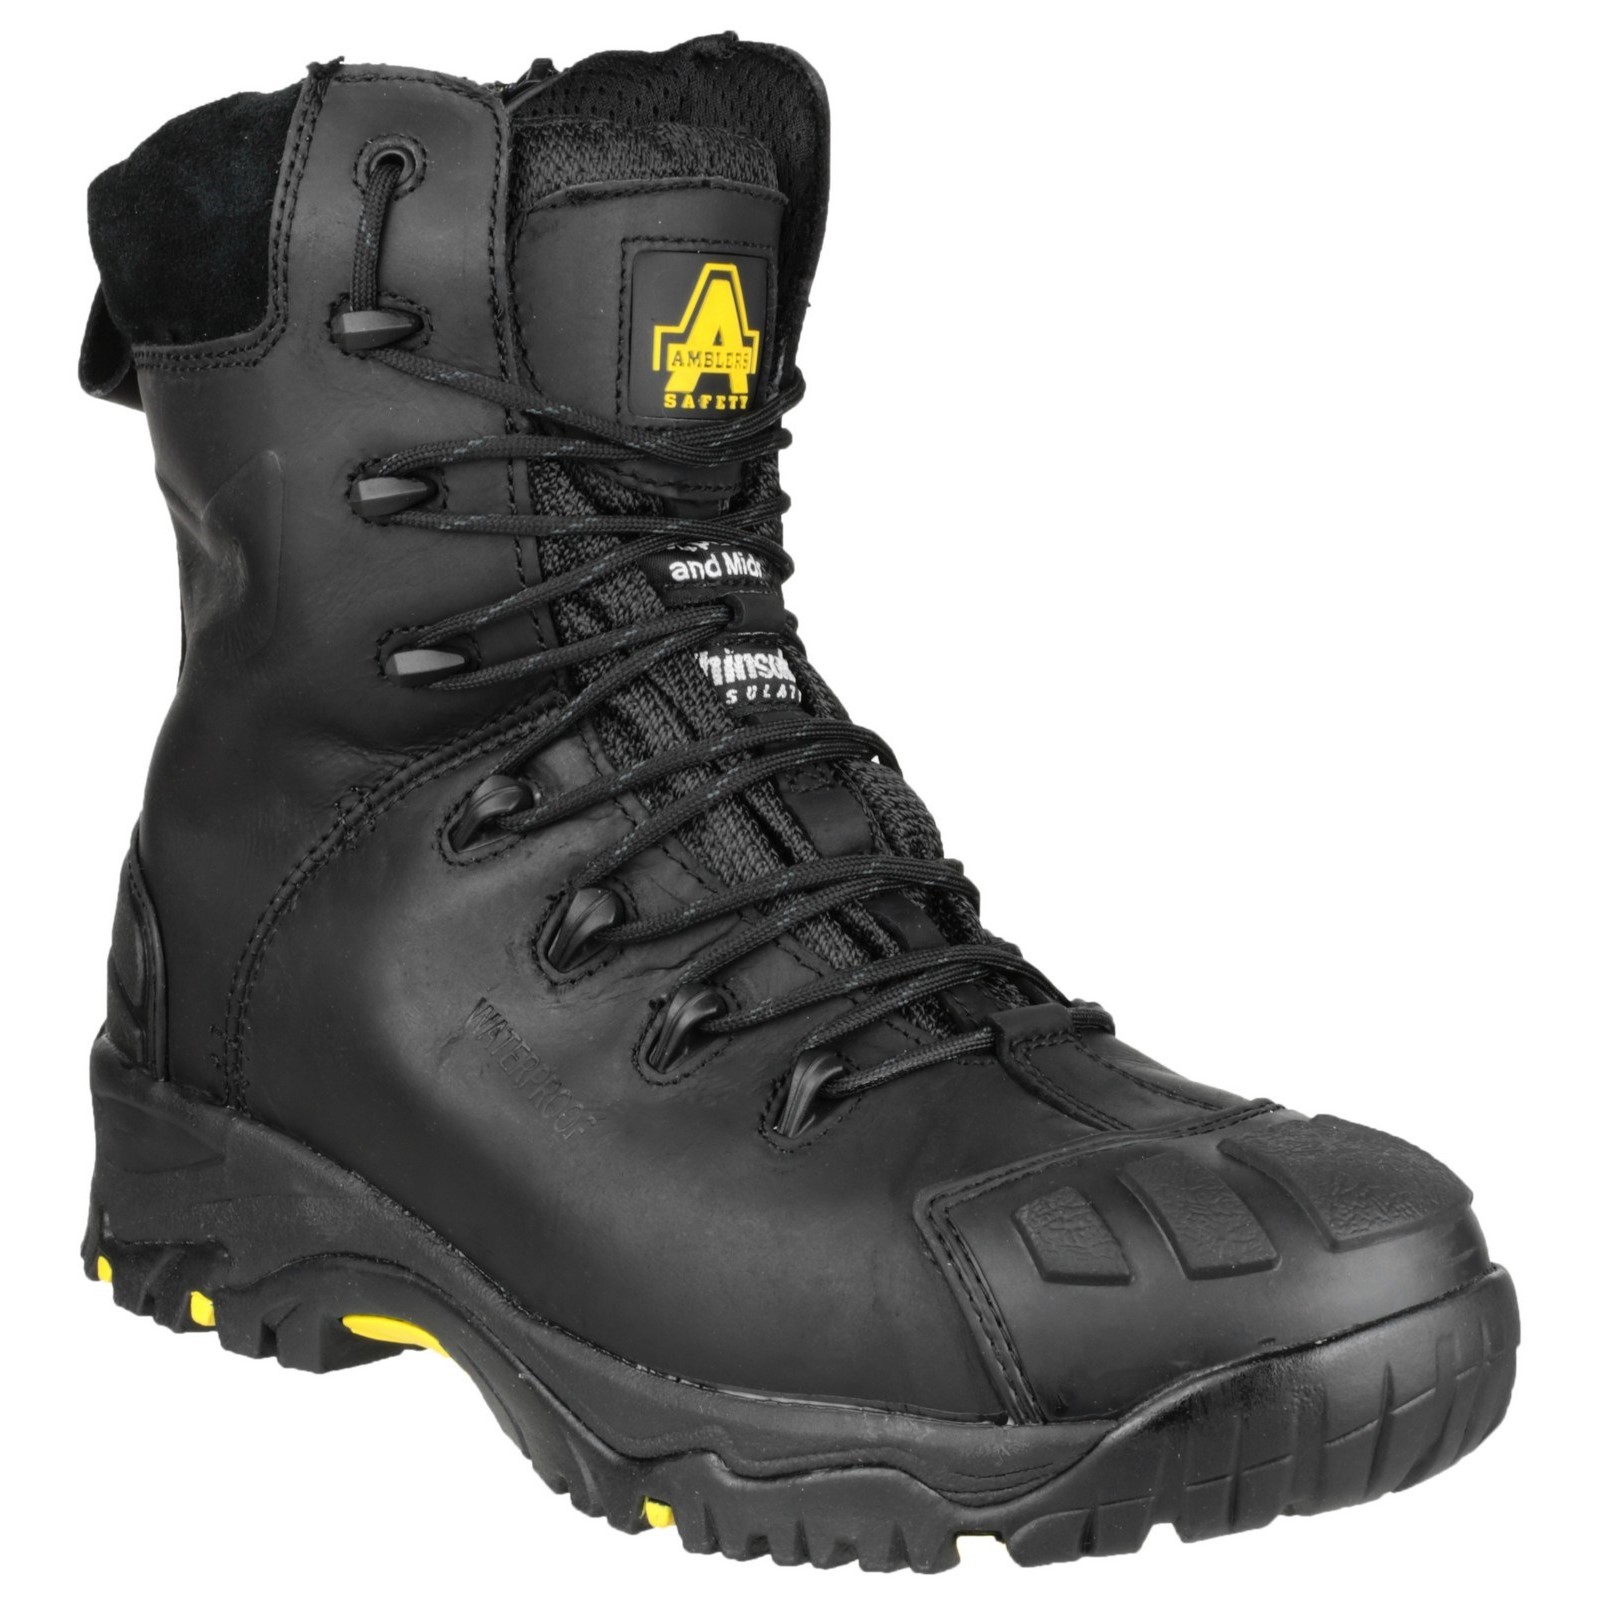 FS999 Hi Leg Composite Safety Boot With Side Zip